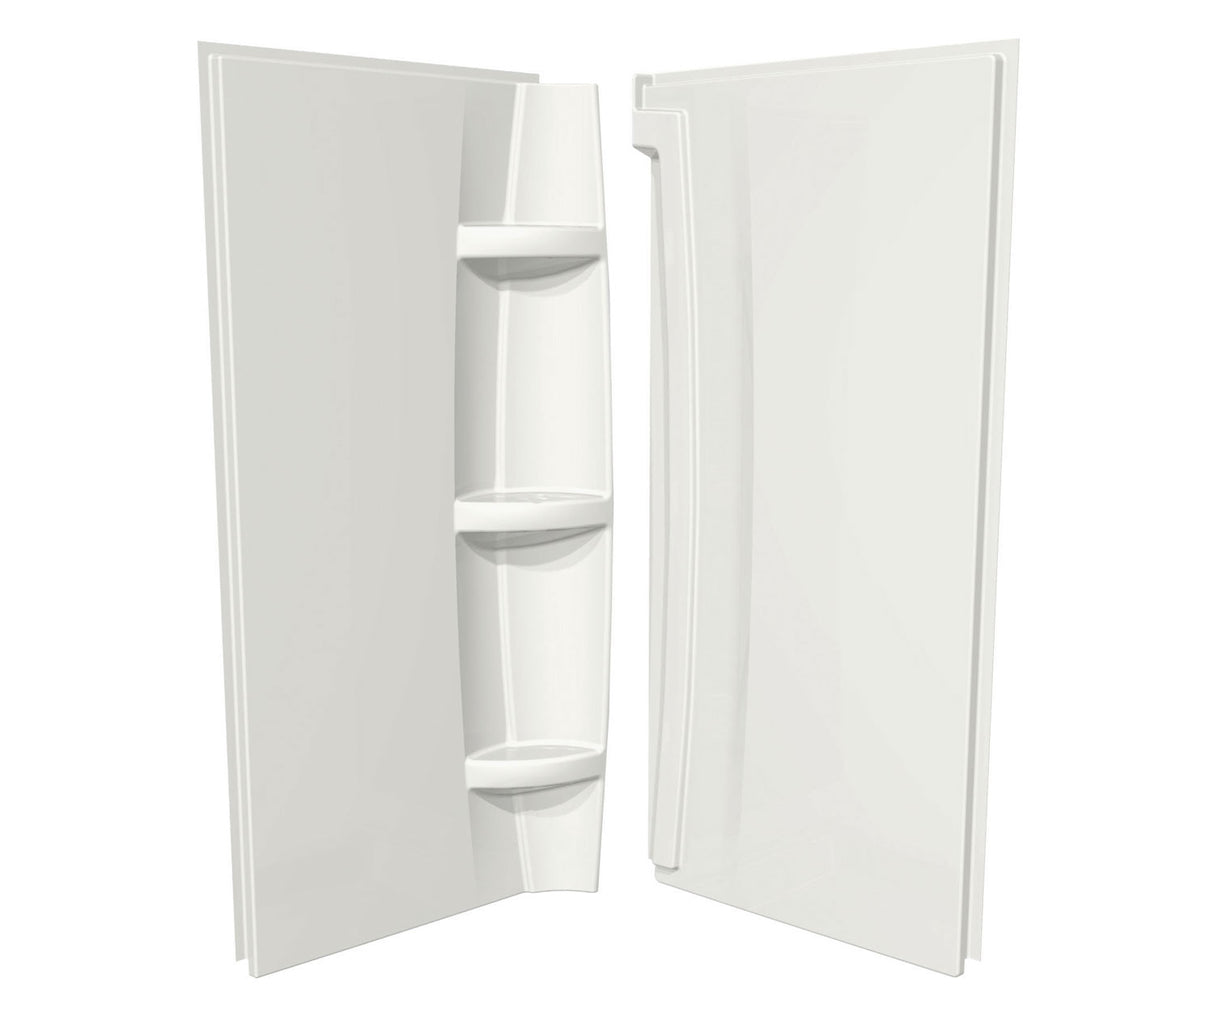 MAAX 105062-000-001-000 30 x 72 in. Acrylic Direct-to-Stud Two-Piece Wall Kit in White